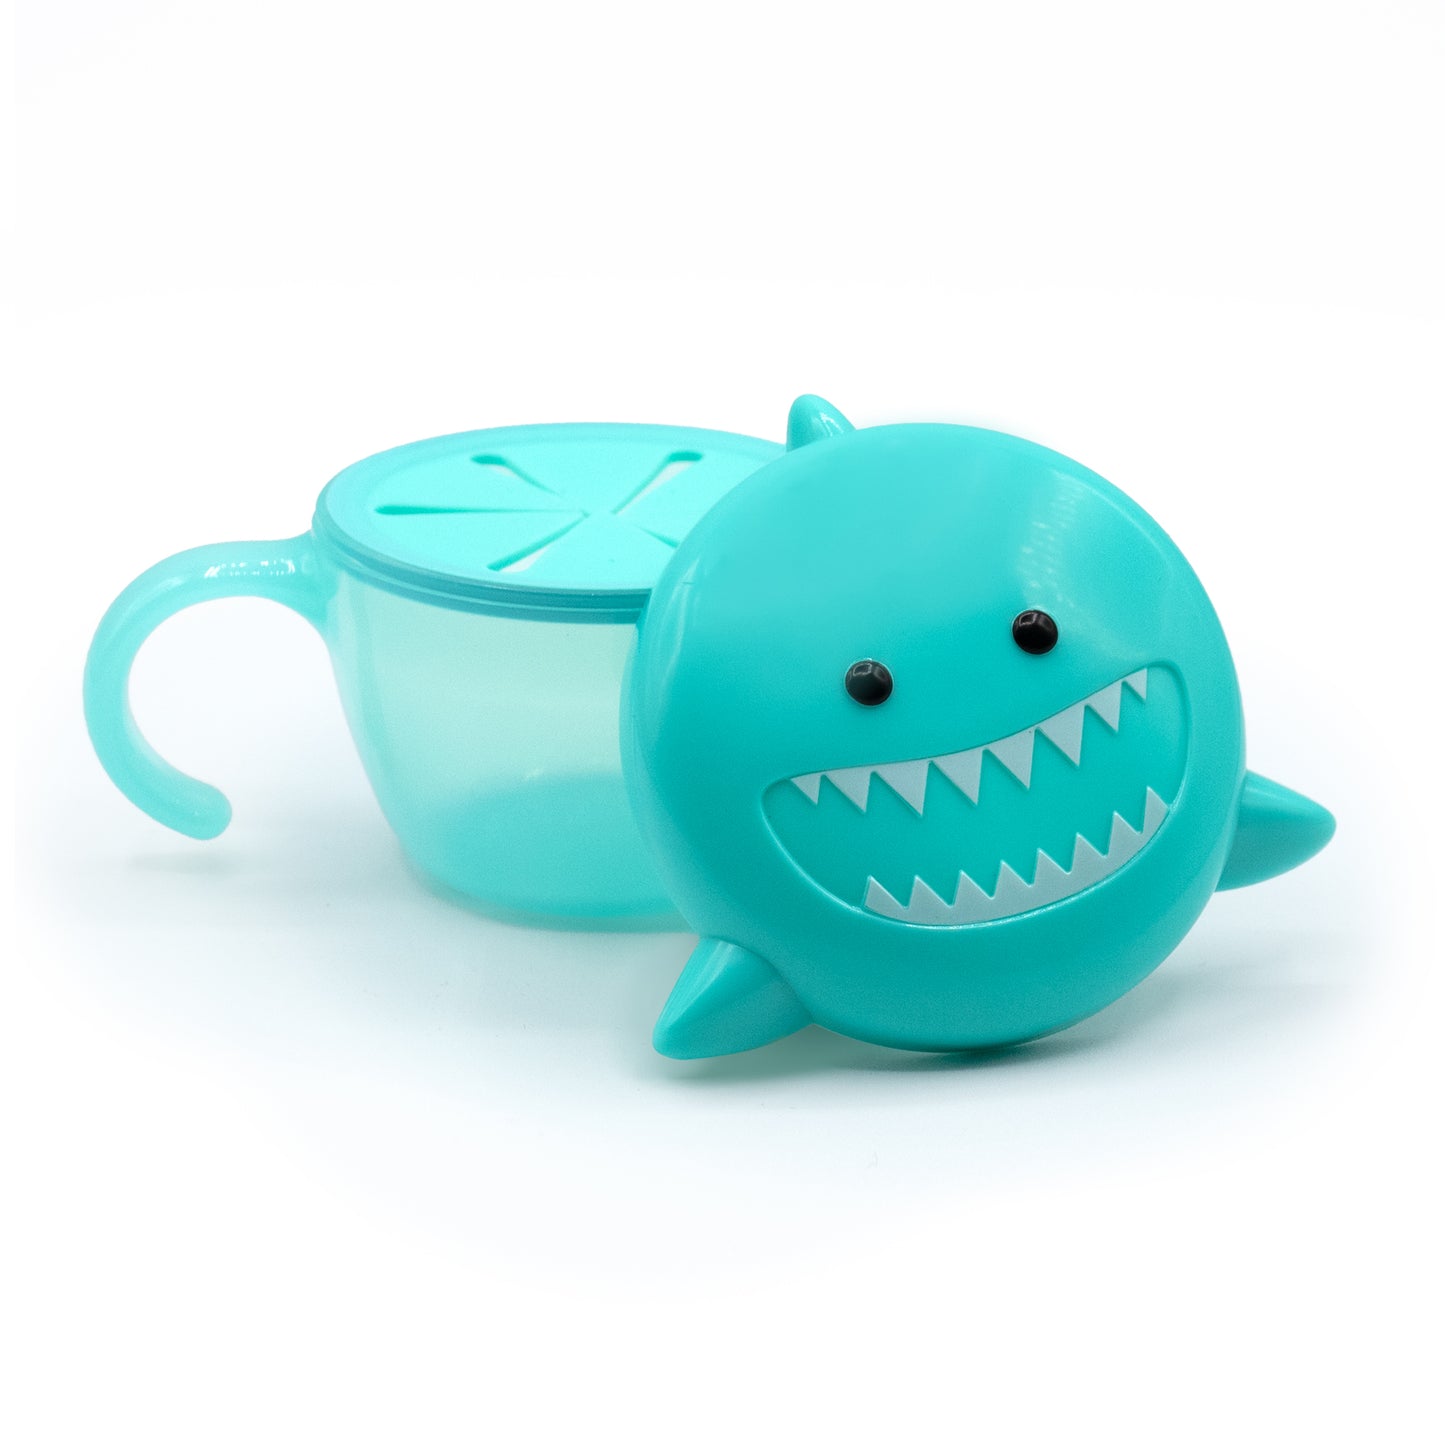 melii Snack Container for Kids - Turquoise Shark Design Mess Free, Adaptable, and Easy to Hold with Removable Finger Trap - Perfect for Independent Snacking, Travel - BPA Free and Dishwasher Safe